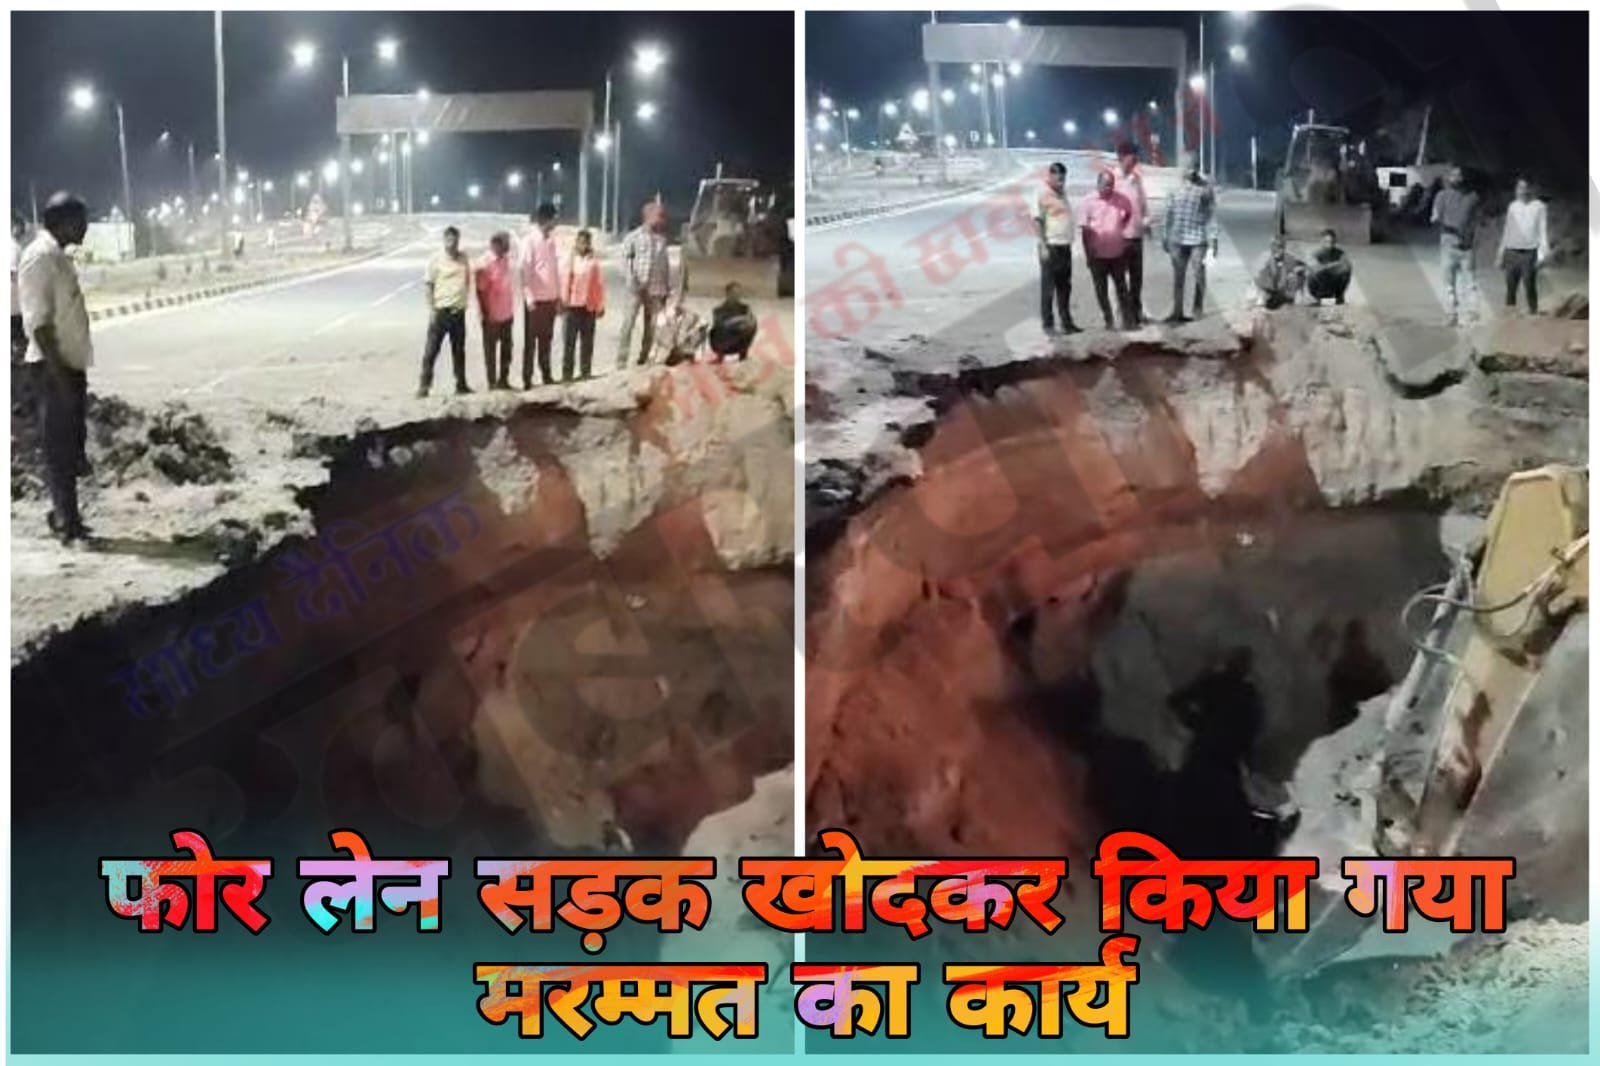 National Highway: There was water leakage under the National Highway